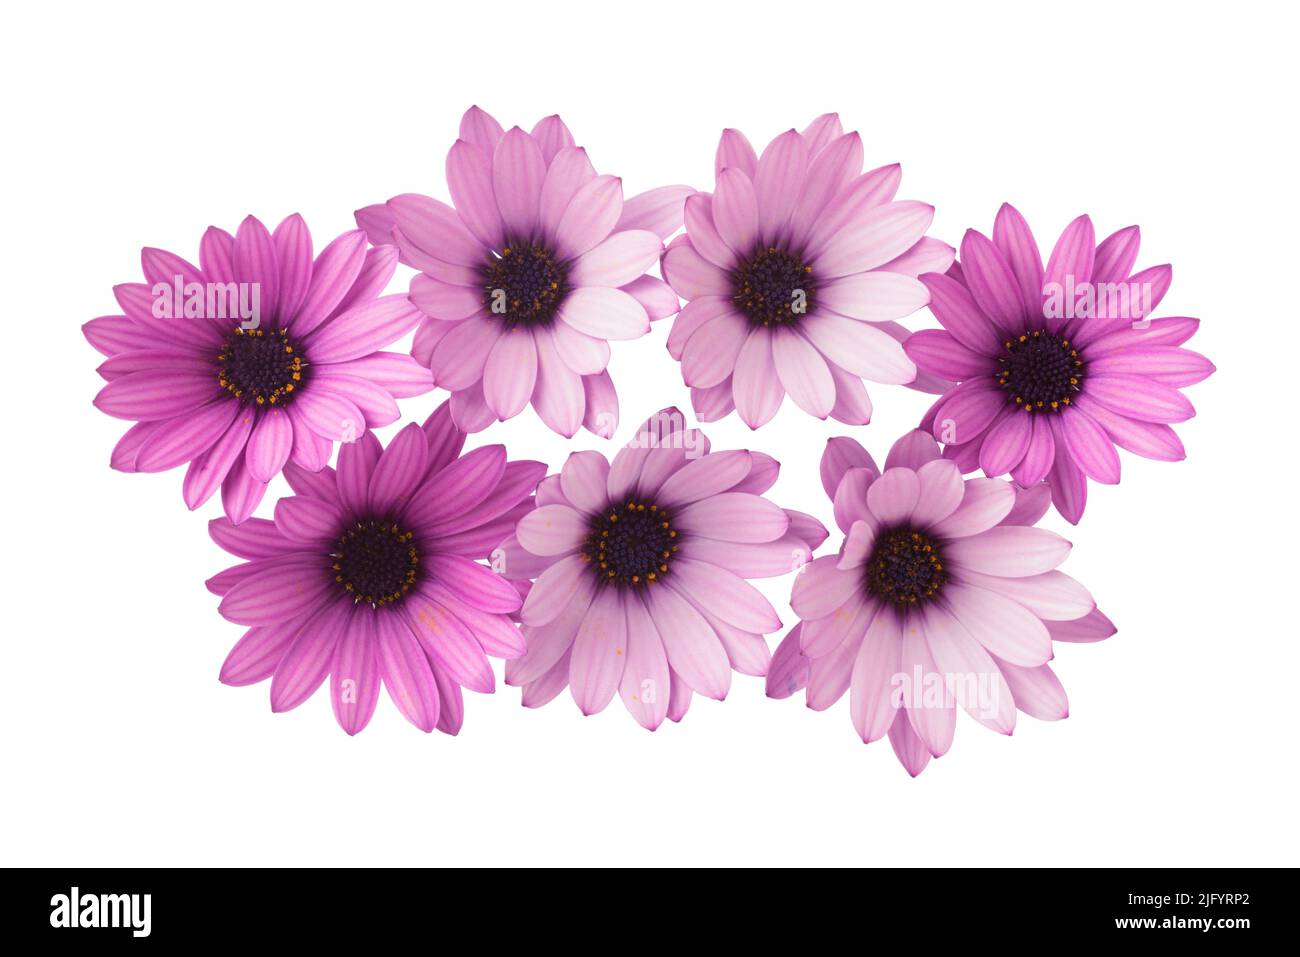 Group Of Purple Daisies Osteospermum Flowers Isolated On White